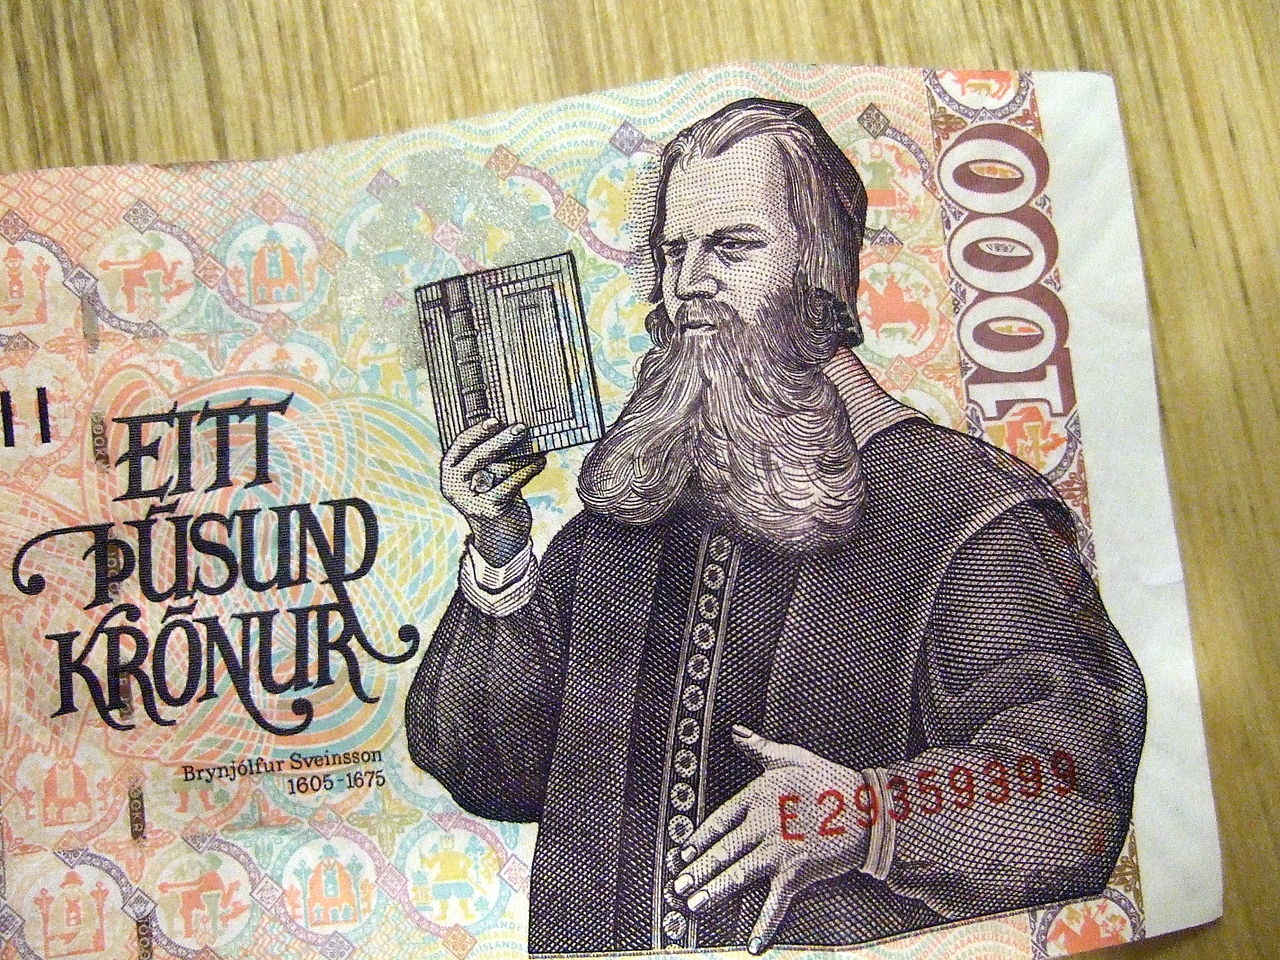 From Iceland - 50 defendants in an 800 million ISK money laundering case